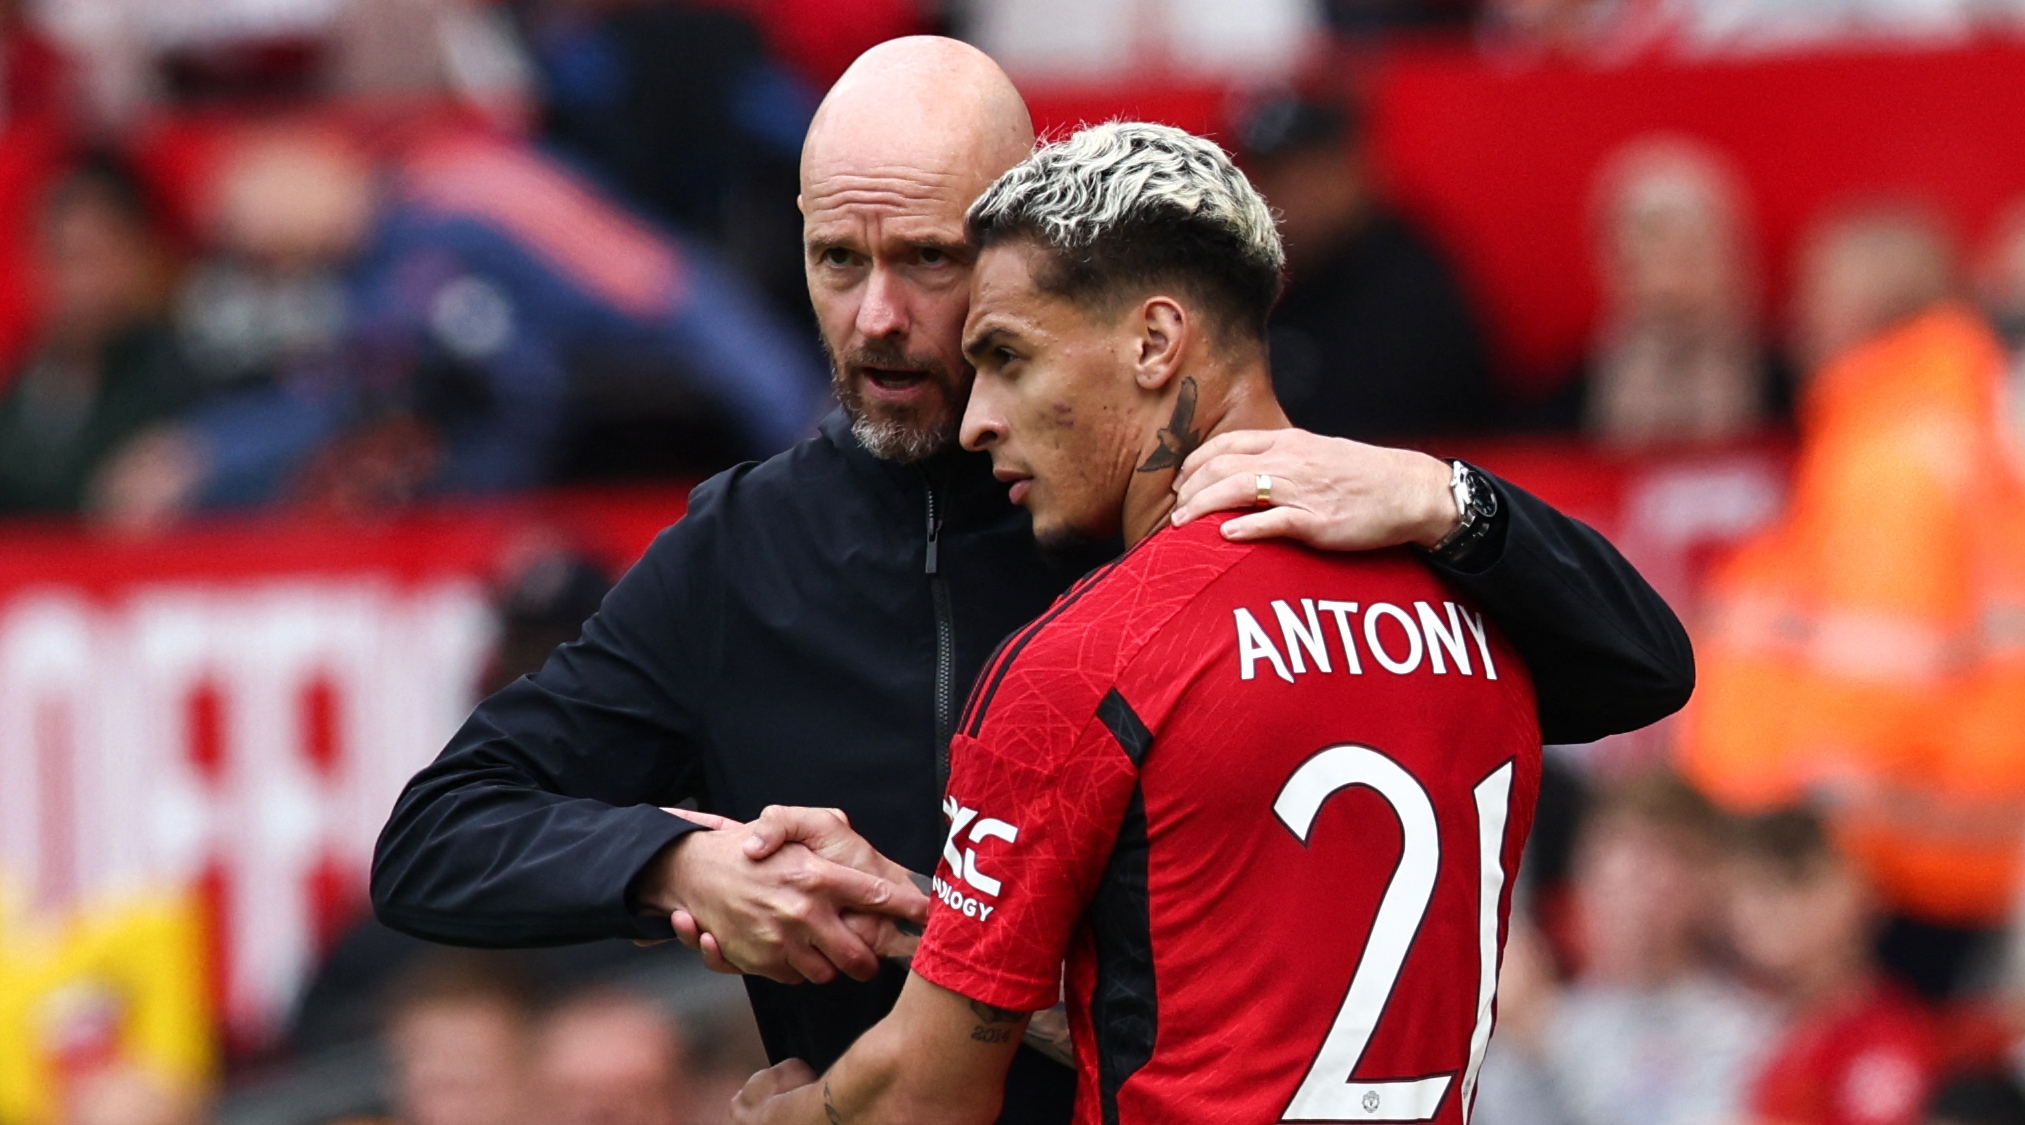 Sports Manchester United's Brazilian midfielder Antony (R) is congratulated by Manchester United's Dutch manager Erik ten Hag (La he leaves the pitch at some stage in the pre-season friendly soccer match between Manchester United and Lens at Ancient Trafford stadium, in Manchester, on August 5, 2023.